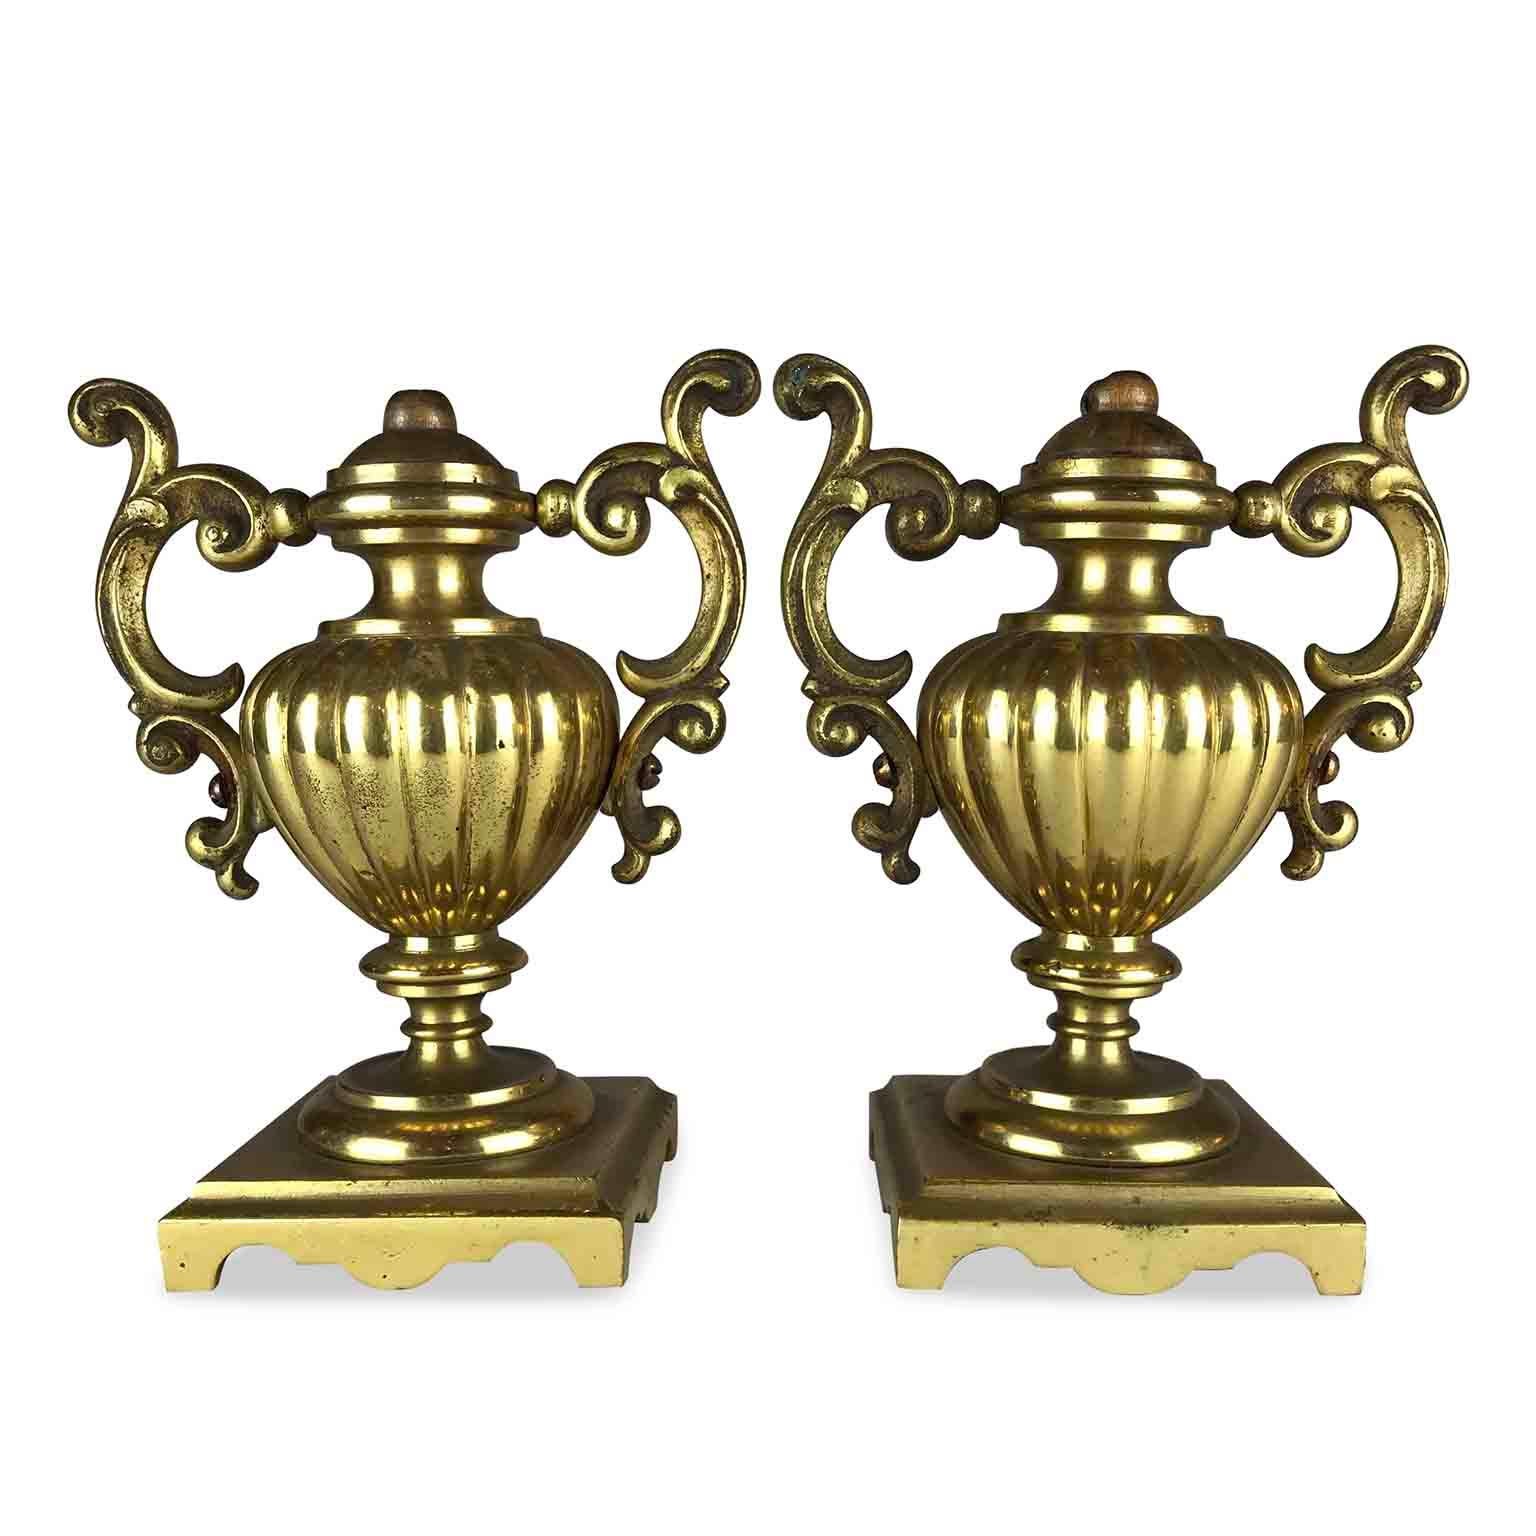 Pair of 19th Century Neoclassica gilded bronze urns from Italy. A pair of amphora shaped vases in mercury gilded and polished bronze. Very small center vases, featuring a fluted body and two double-scroll handles, these antique bronze portapalme,